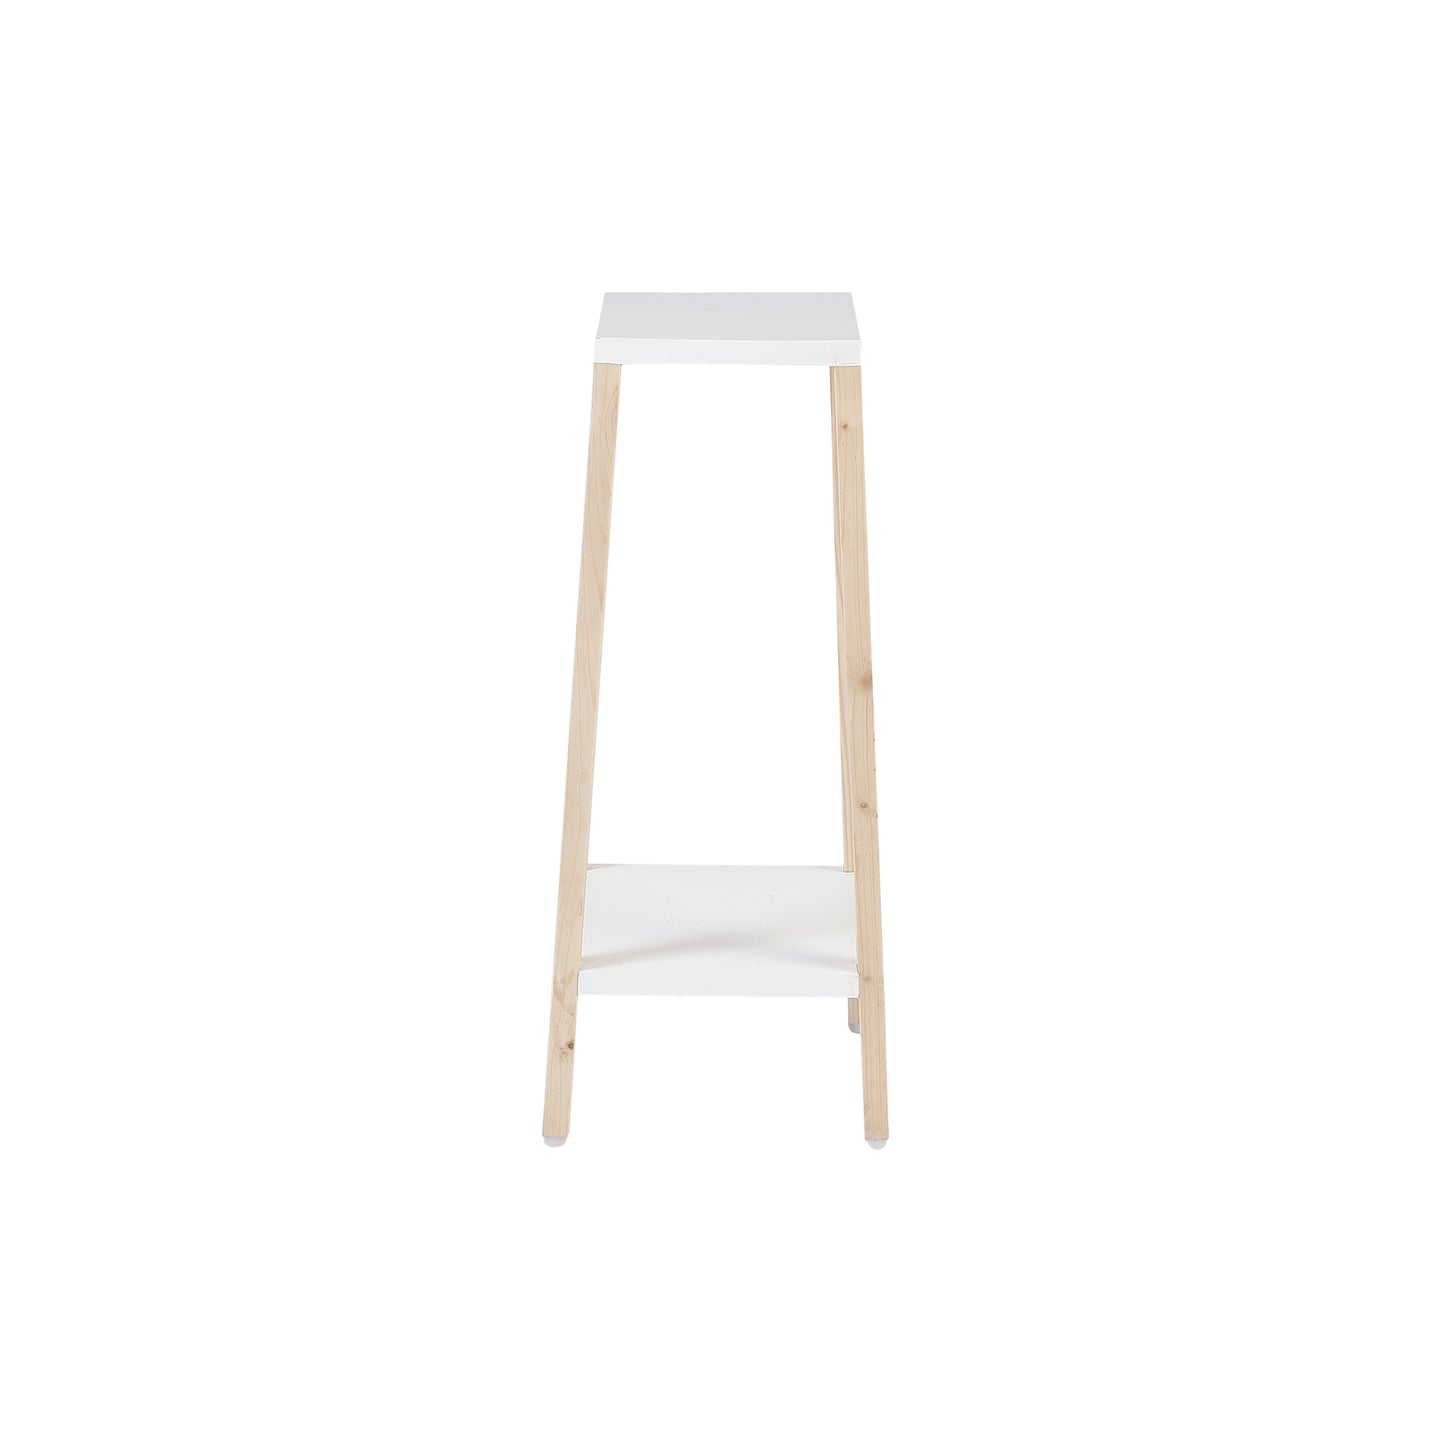 A Tiny Mistake Square Four Legged Tapering Two Tier Decorative Stand (Two Tiers) (White Base with Light Legs)